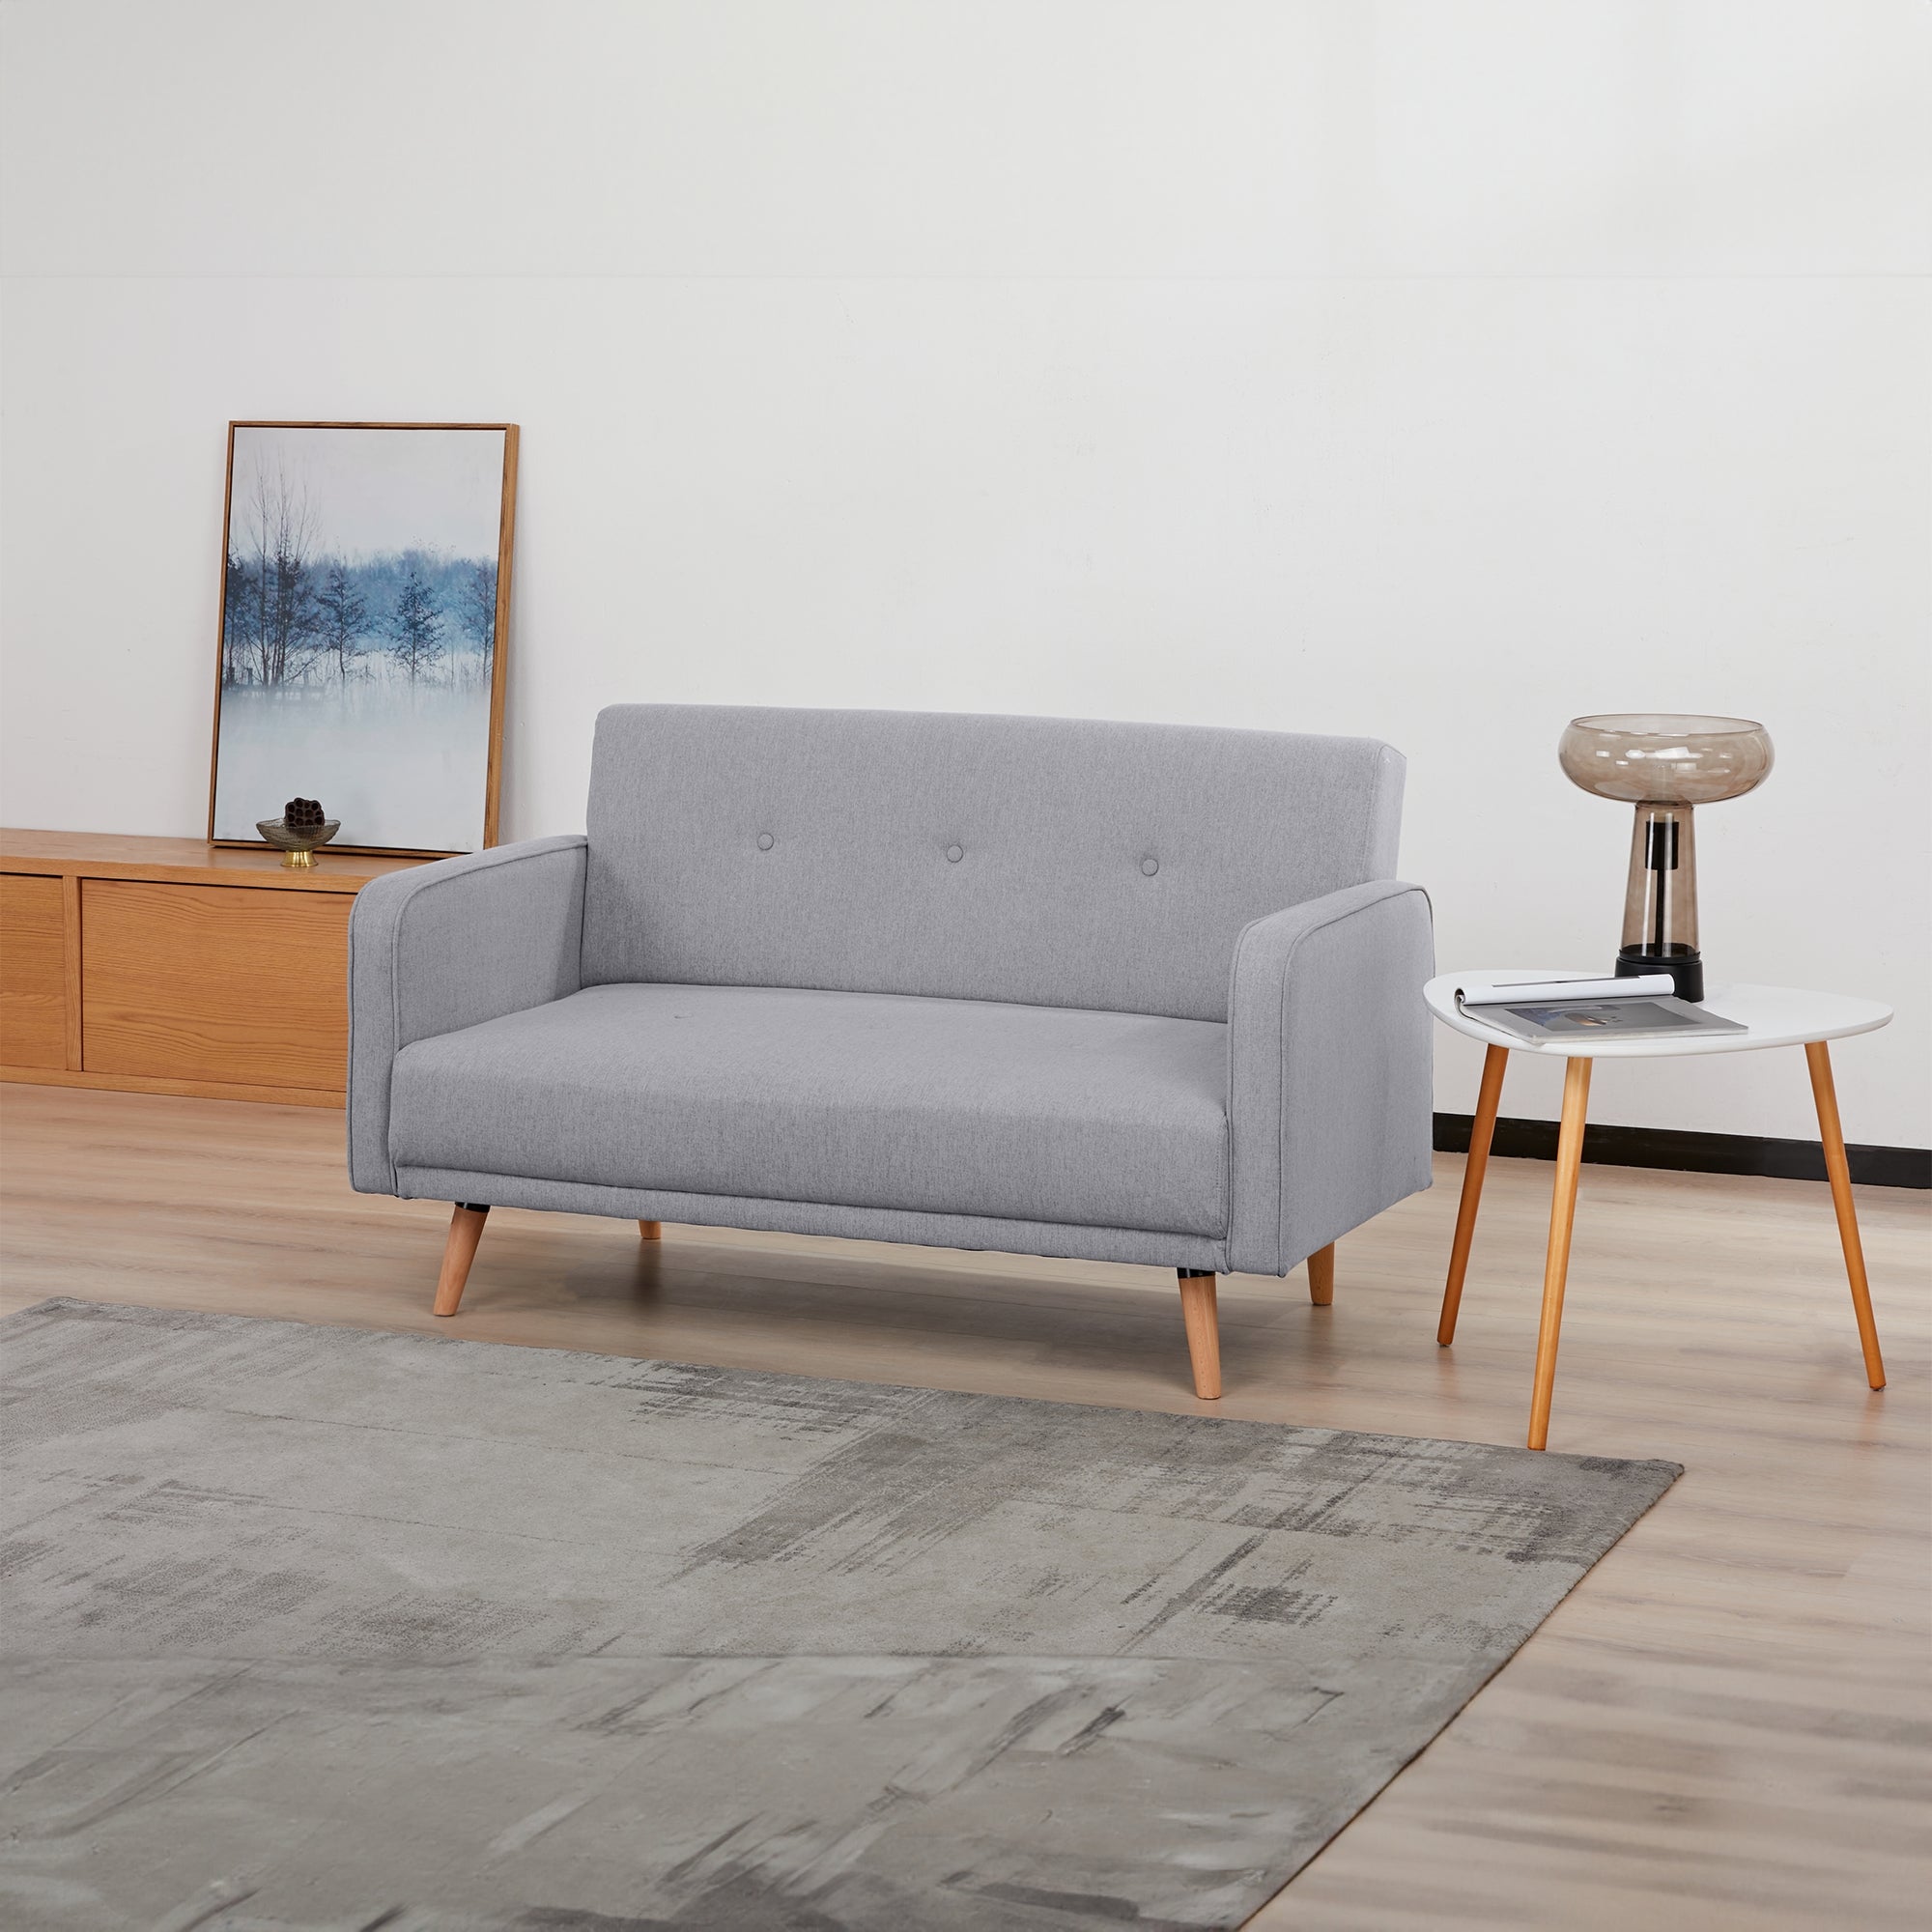 Grey 2-Seater Fabric Sofa with Wood Legs, Foam Support